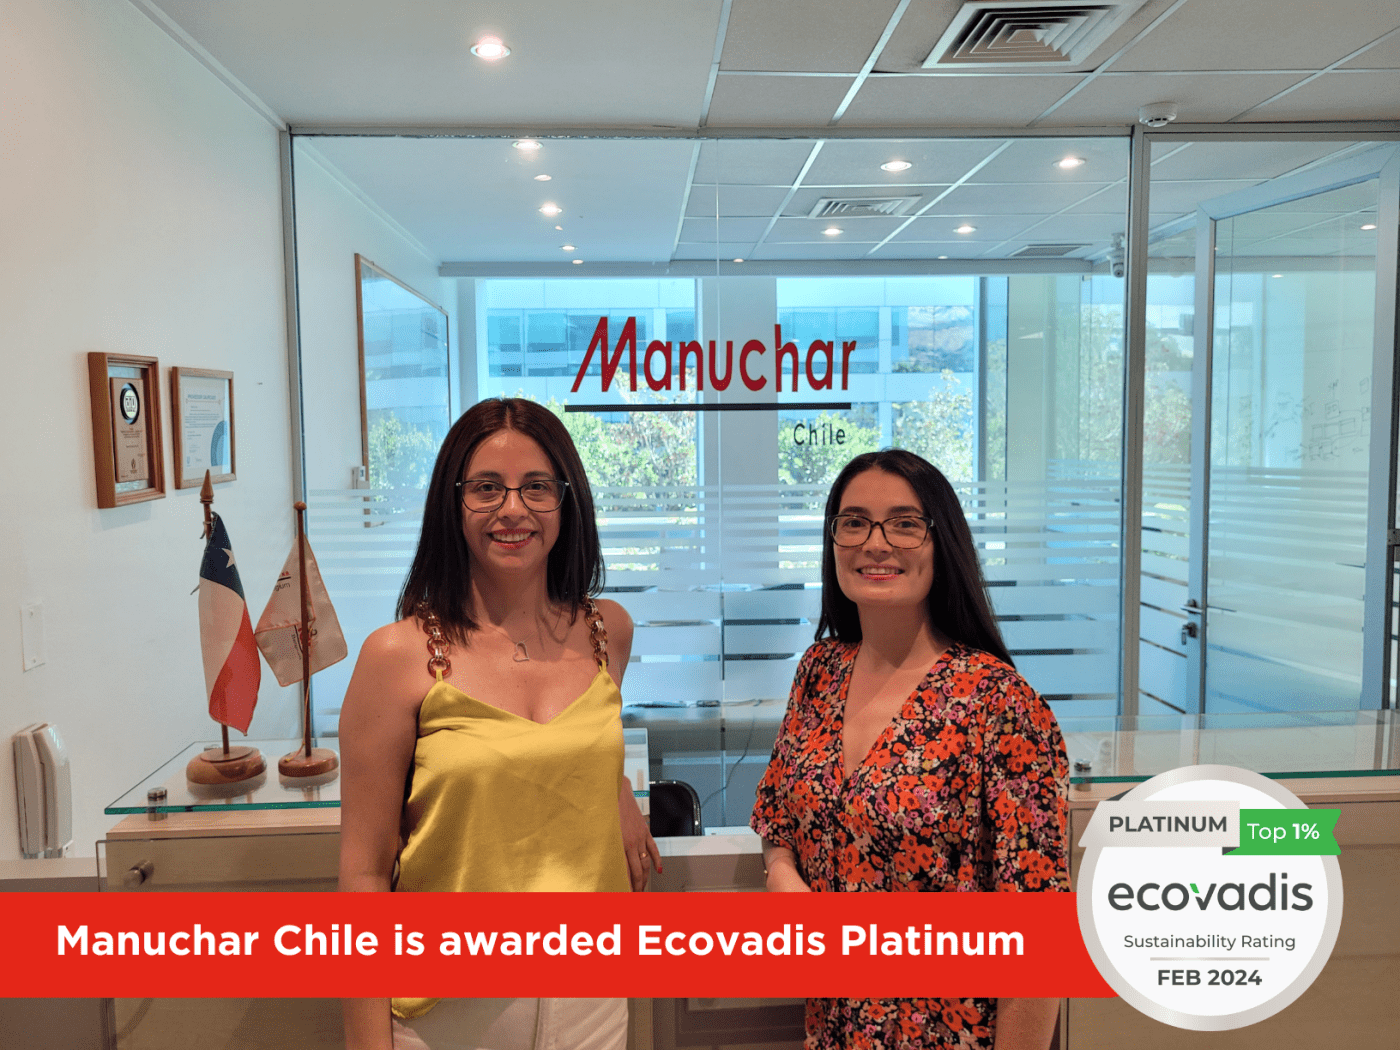 Manuchar Chile is awarded 